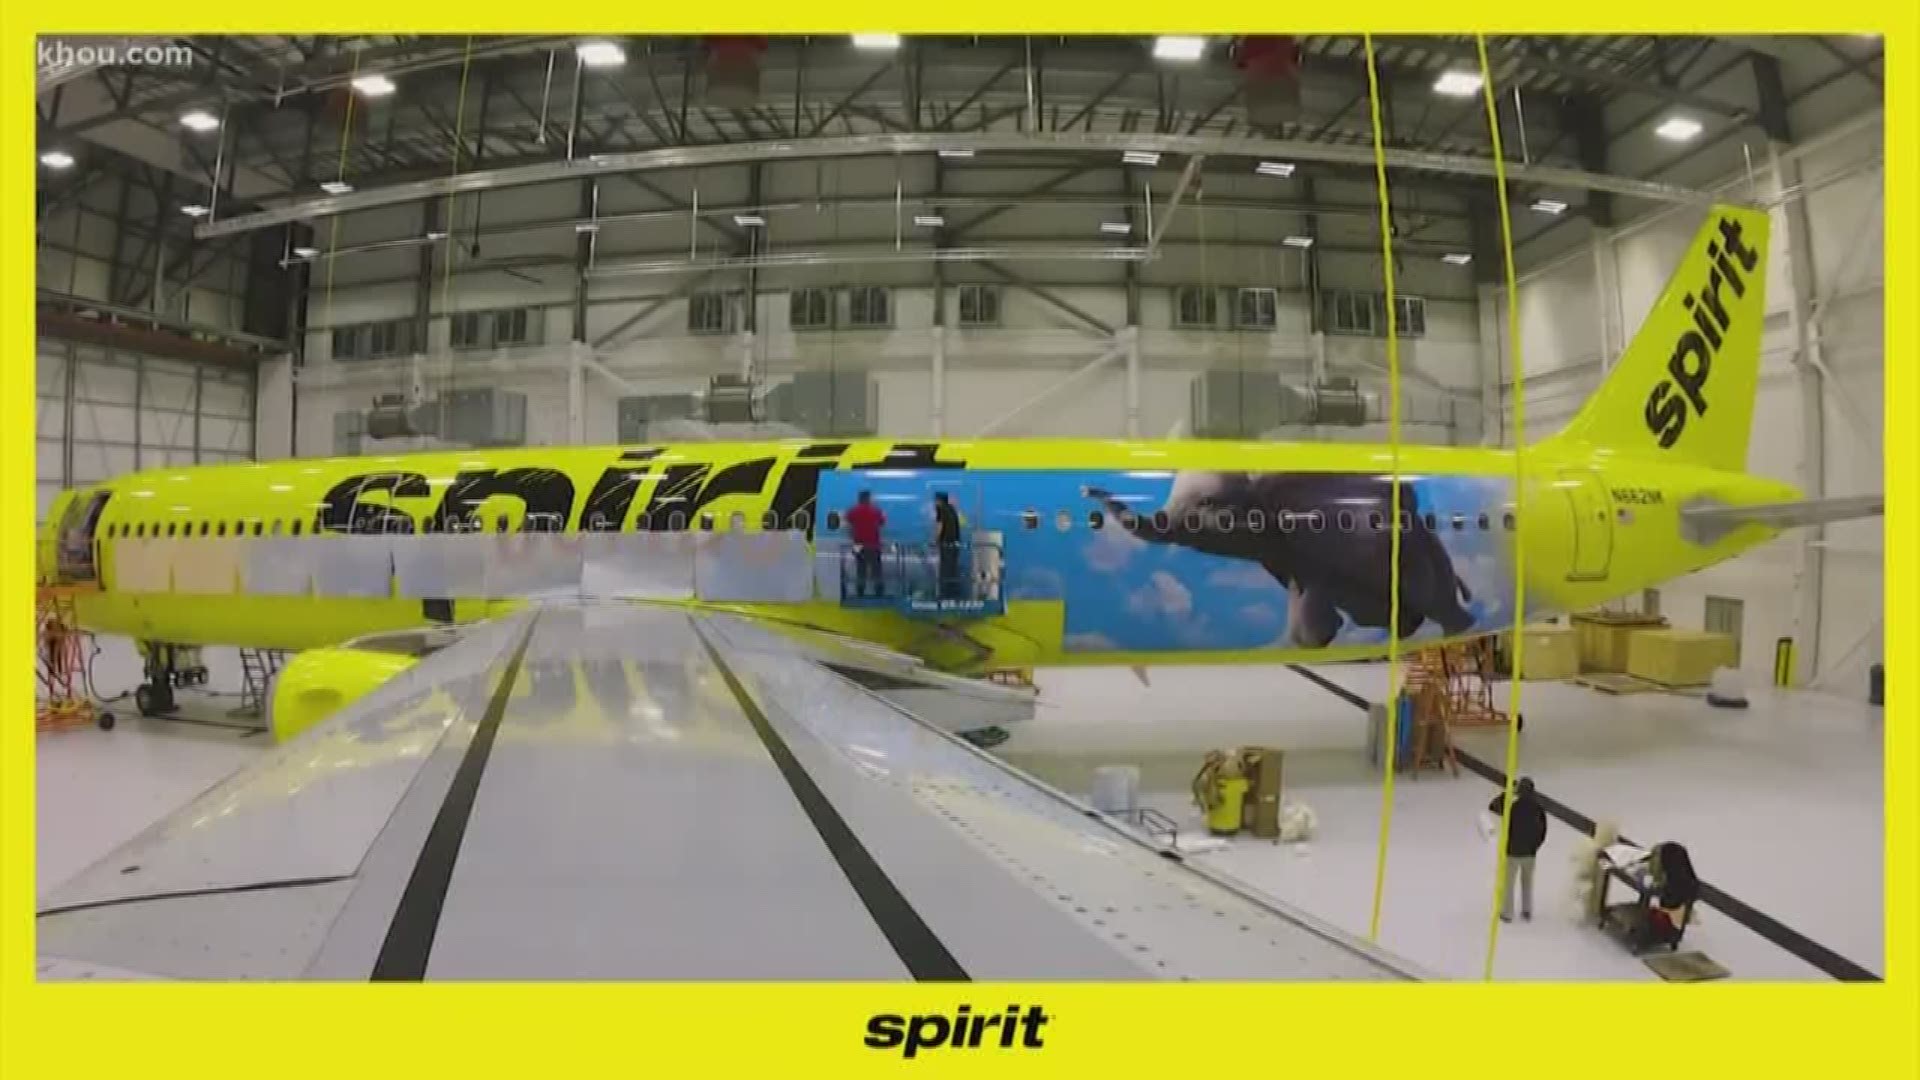 Have you ever seen an elephant fly? Spirit Airlines unveiled its "Dumbo"-themed jet ahead of the movie's premiere in theaters.